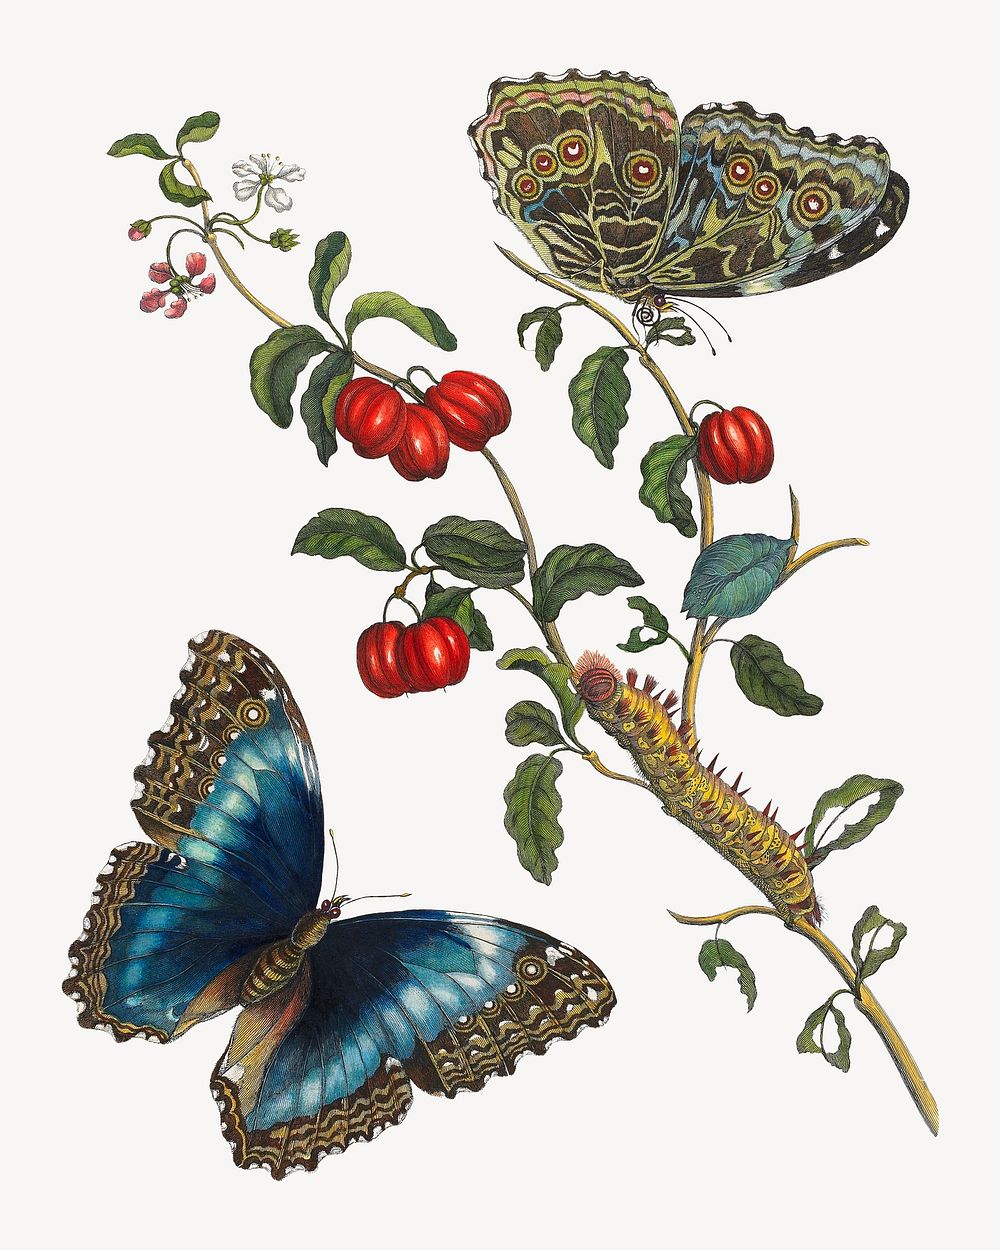 Blue Butterflies and Red Fruits, vintage botanical illustration by Maria Sibylla Merian. Remixed by rawpixel.